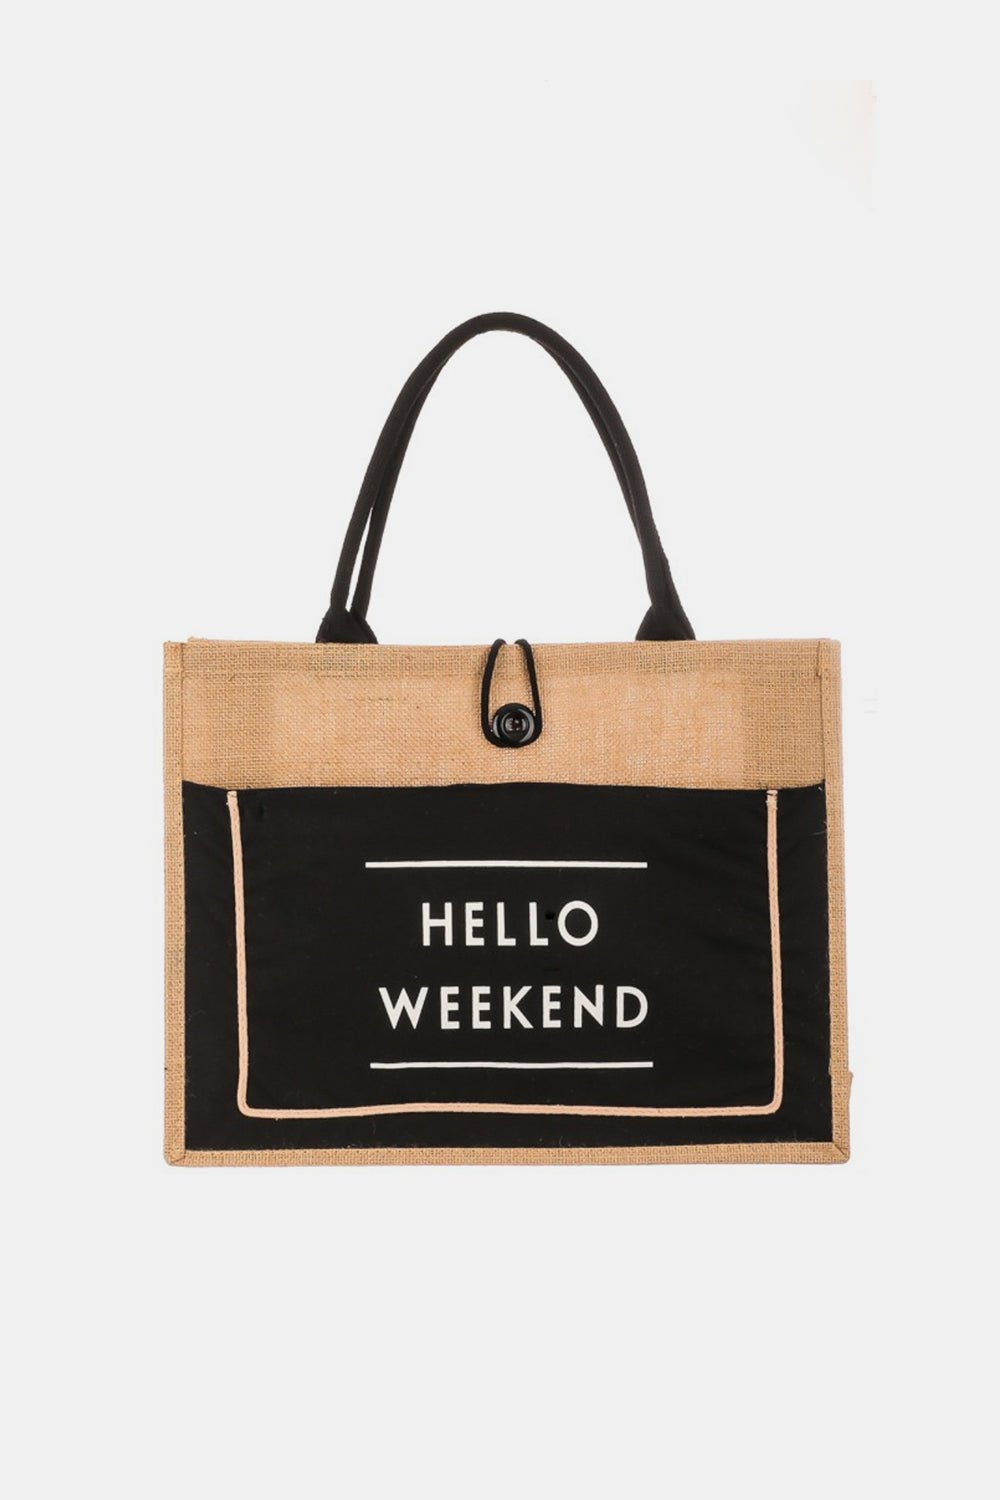 Fame Hello Weekend Burlap Tote Bag - Fashion Girl Online Store